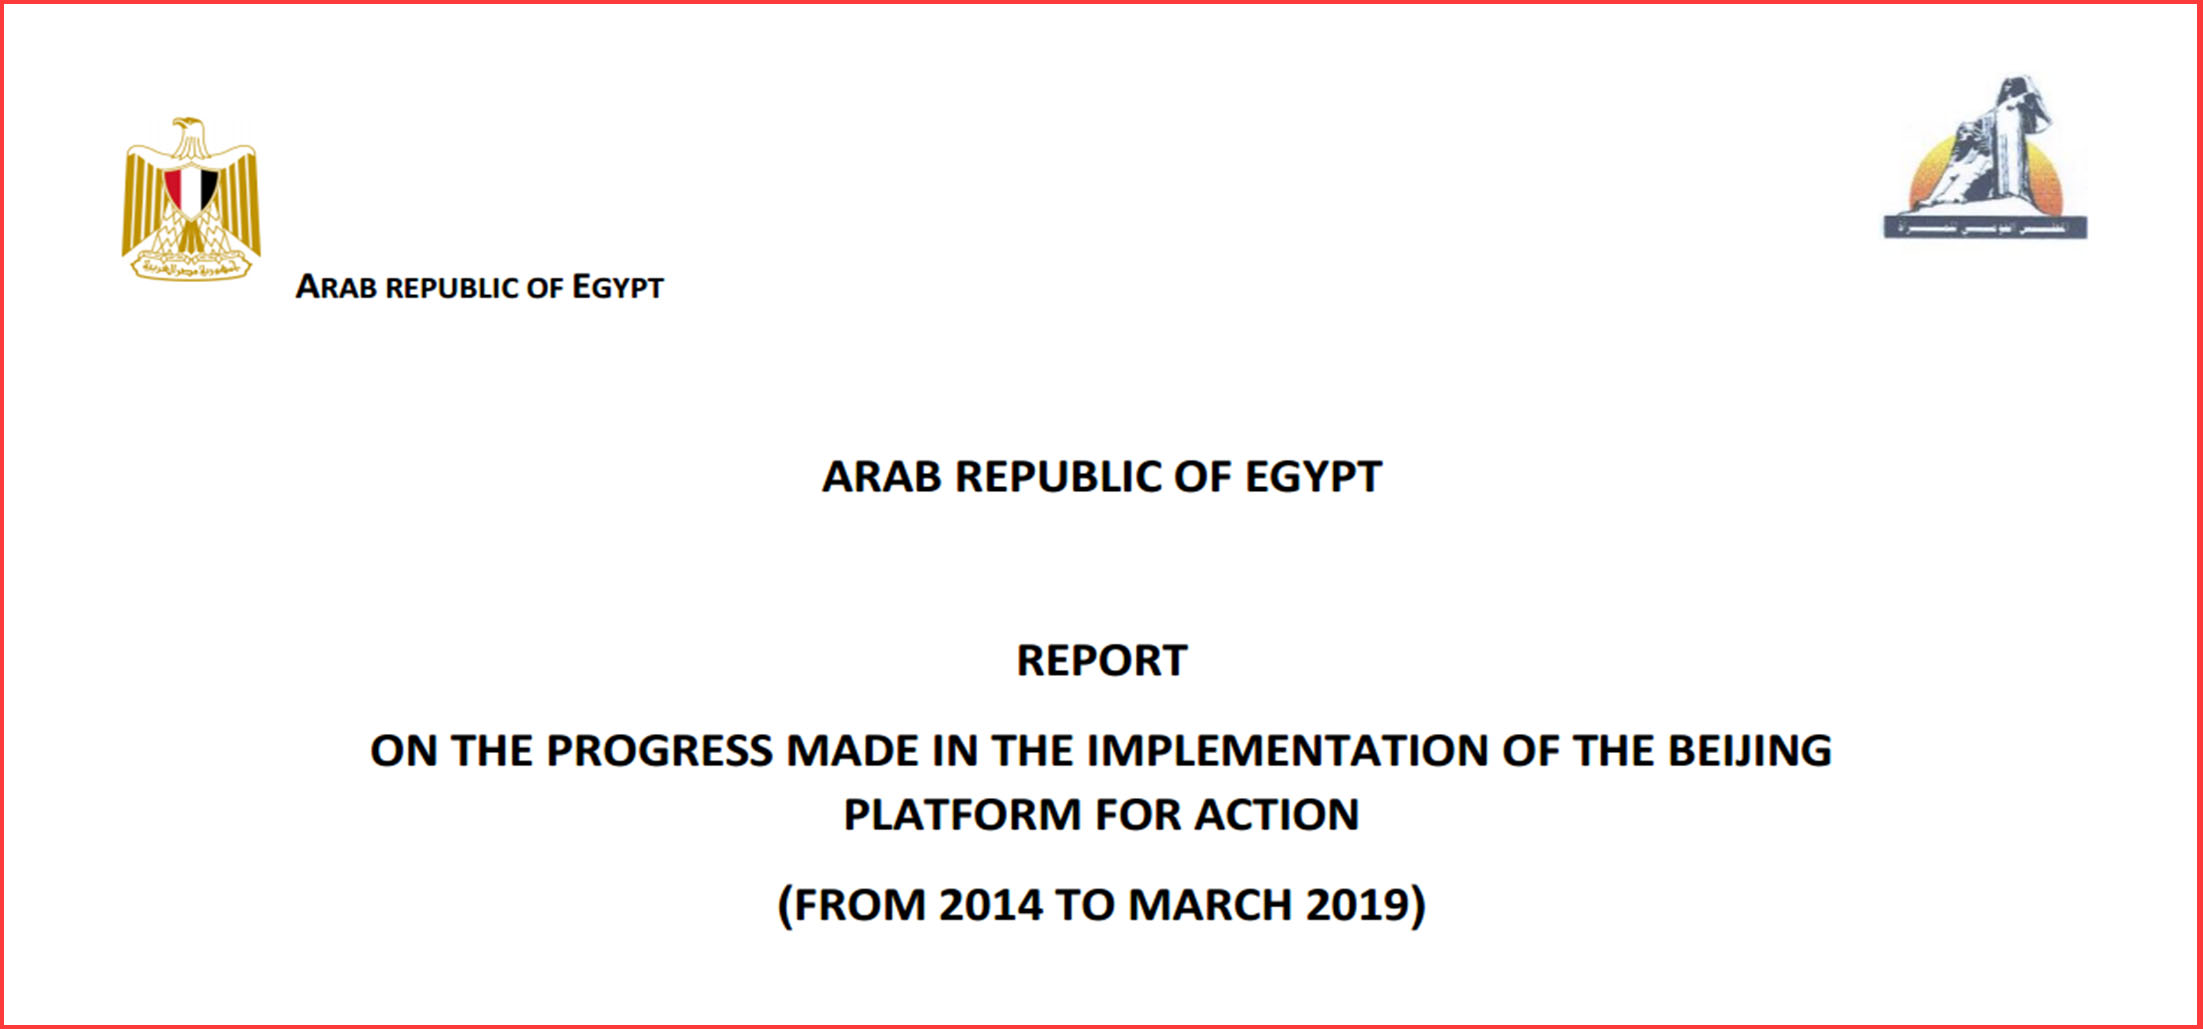 REPORT ON THE PROGRESS MADE IN THE IMPLEMENTATION OF THE BEIJING PLATFORM FOR ACTION AFTER 25 YEARS: ARAB REPUBLIC OF EGYPT REPORT